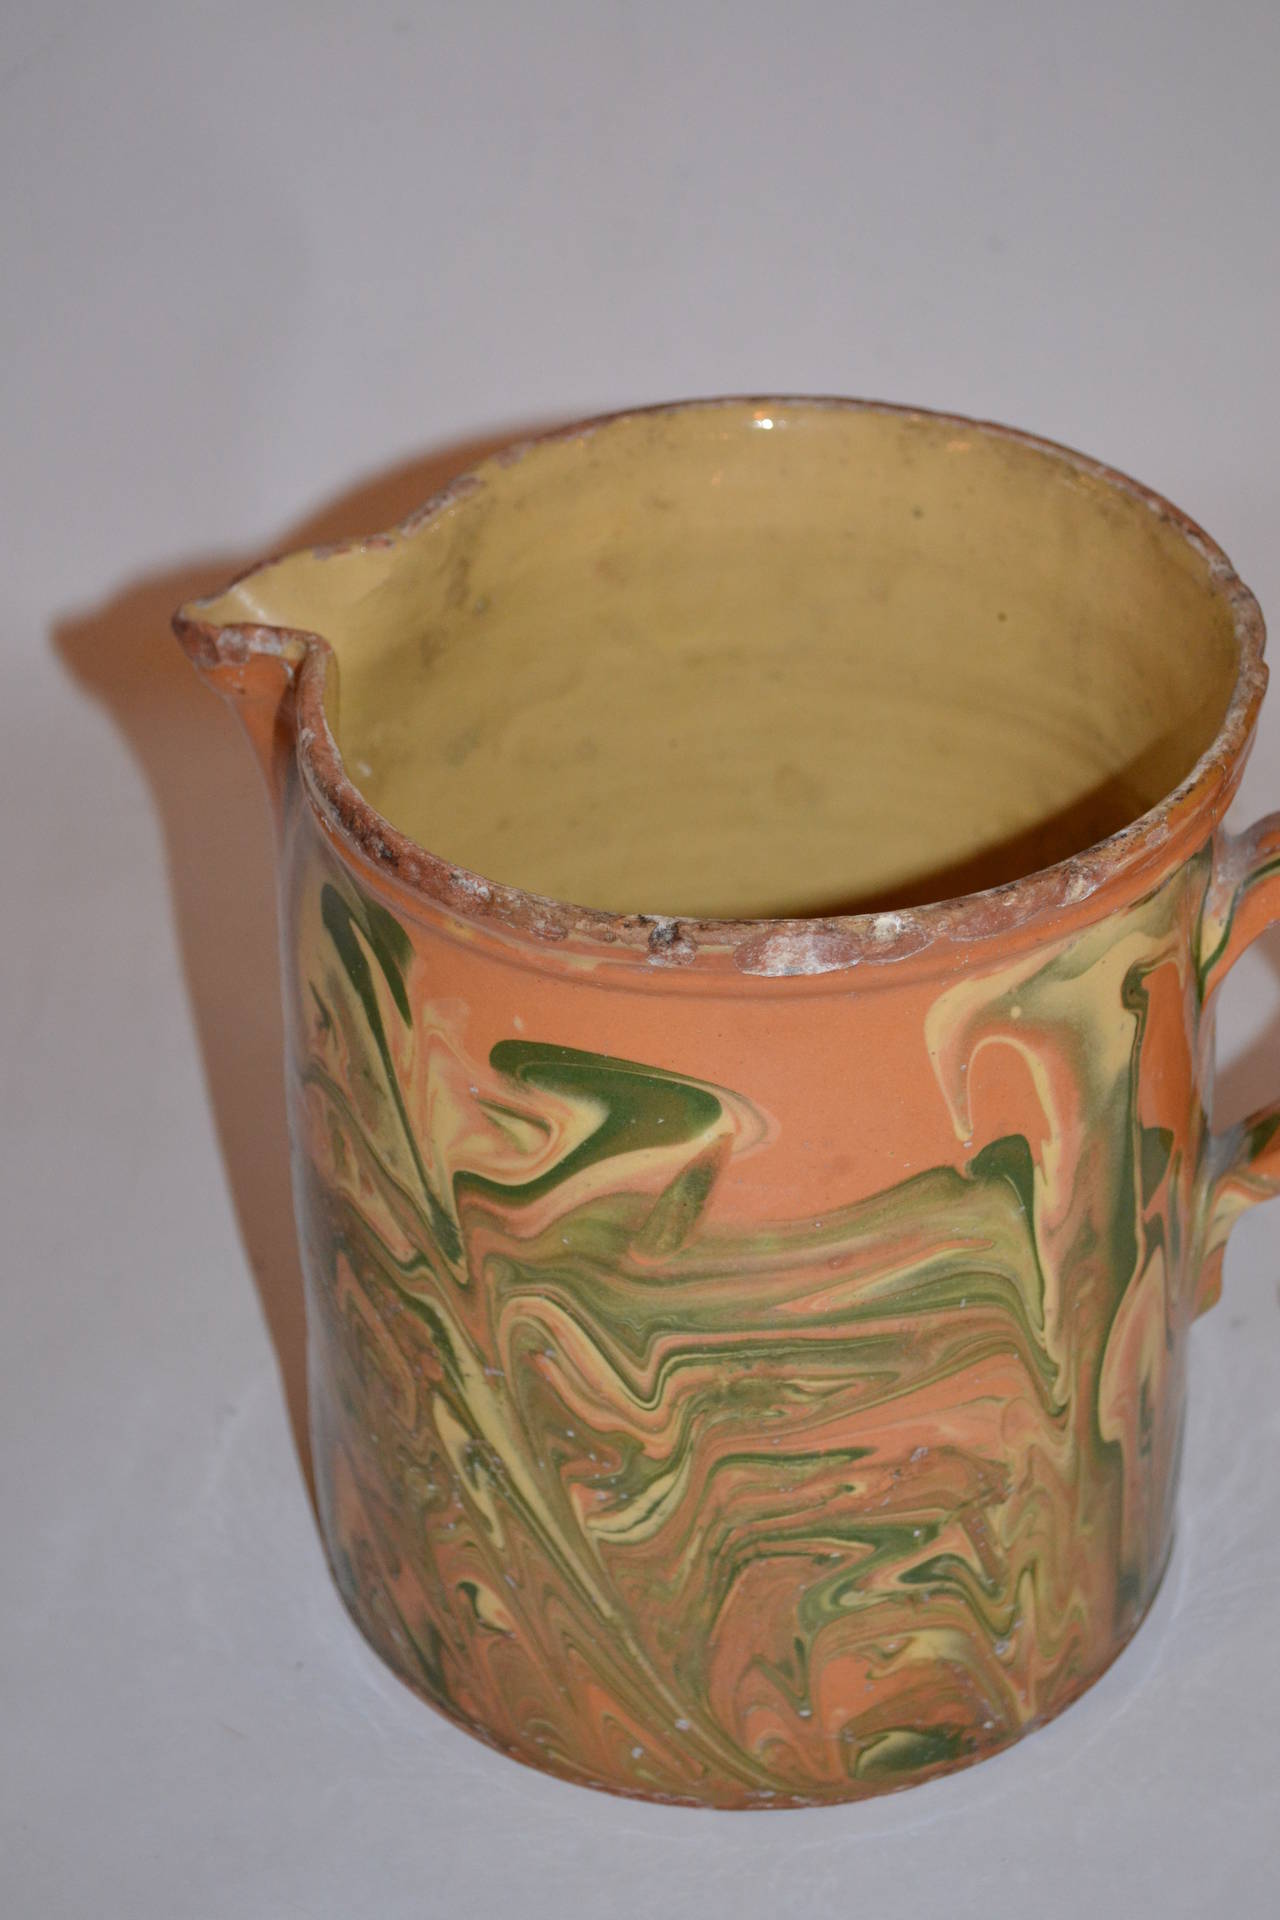 Yellow Stoneware with plain interior and painted exterior